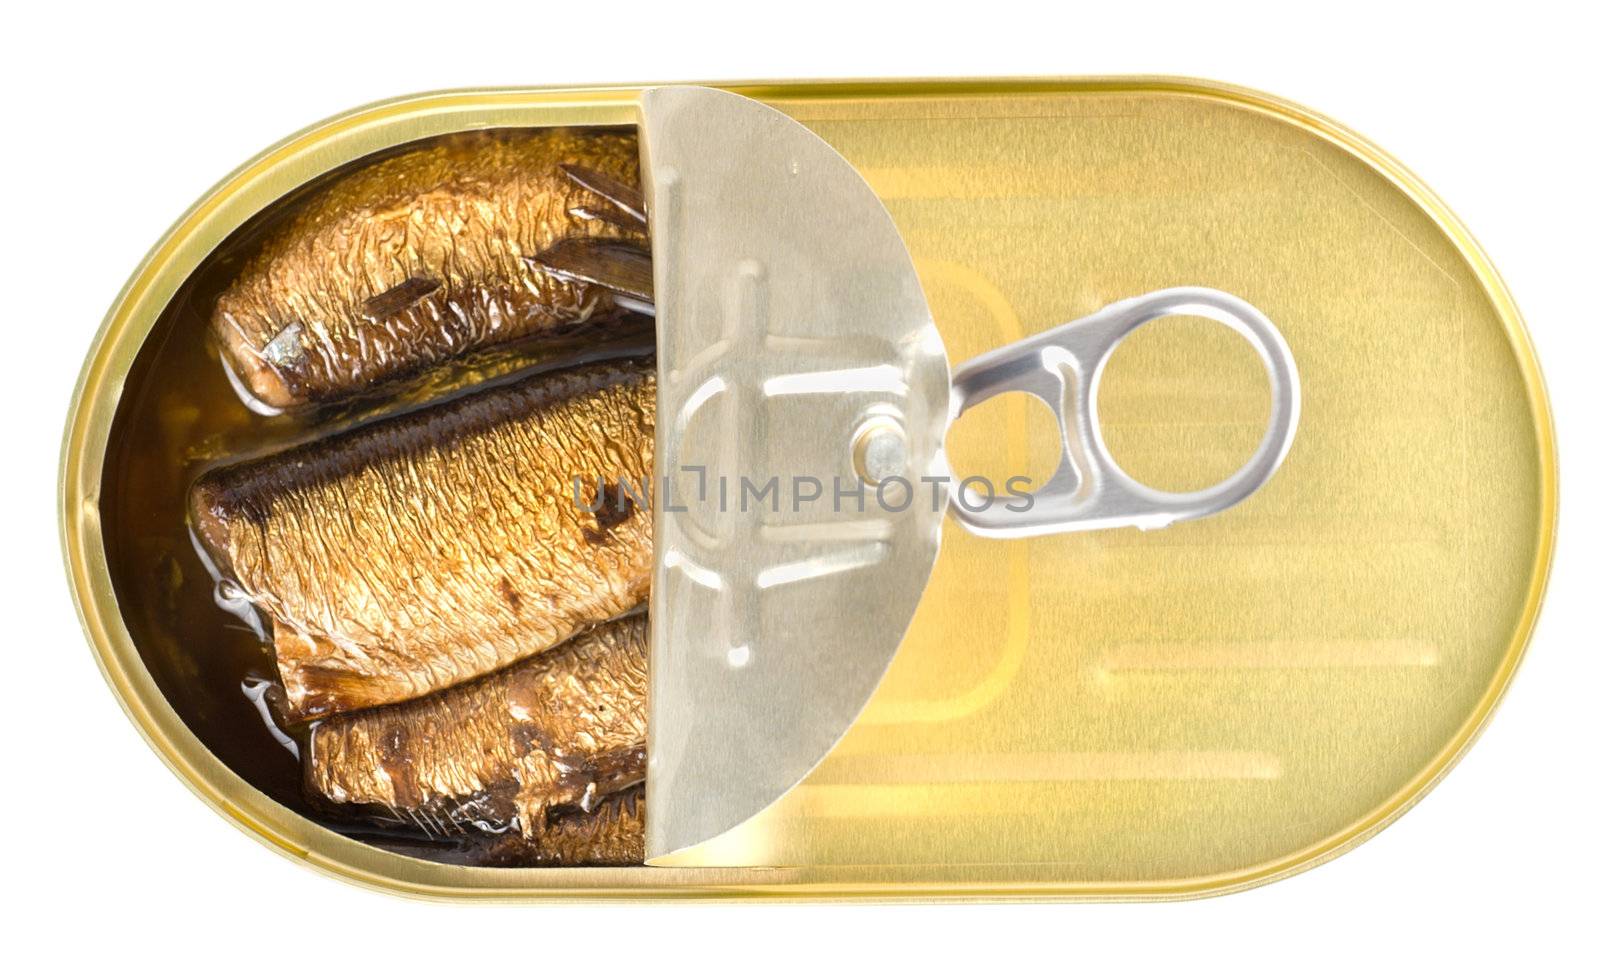 Sprats by Givaga